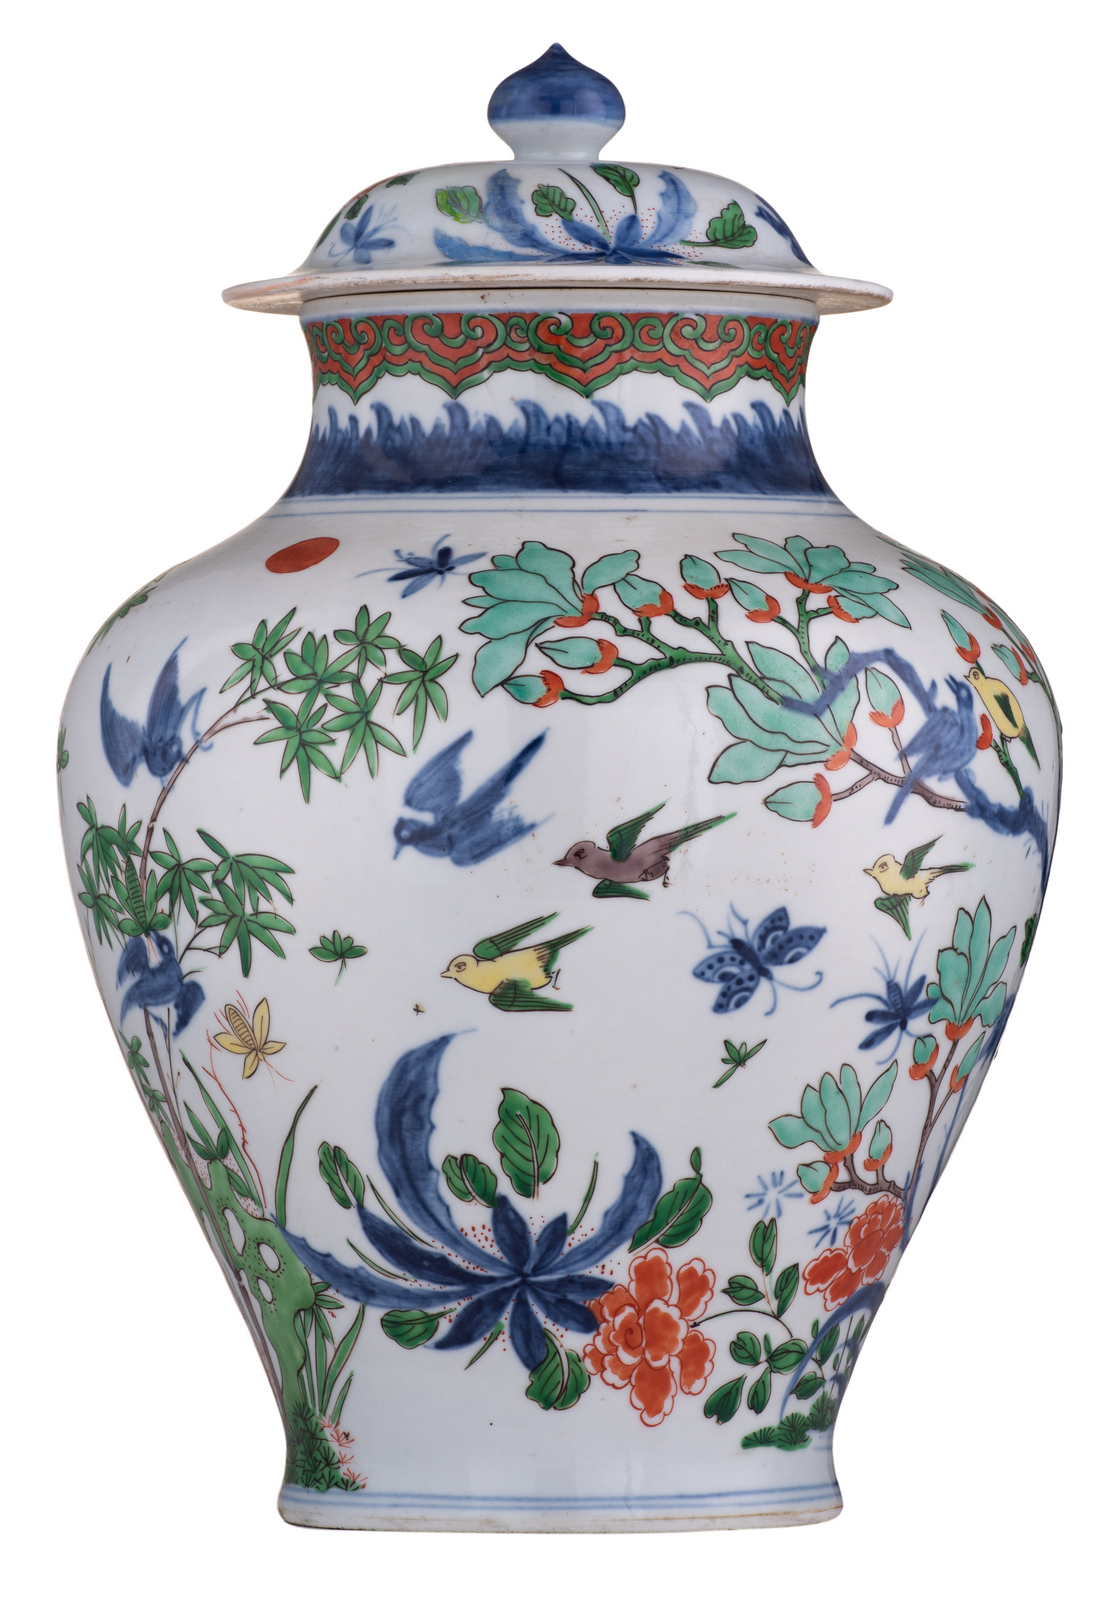 A polychrome Samson vase and cover, decorated with chinoiserie depicting birds and flower